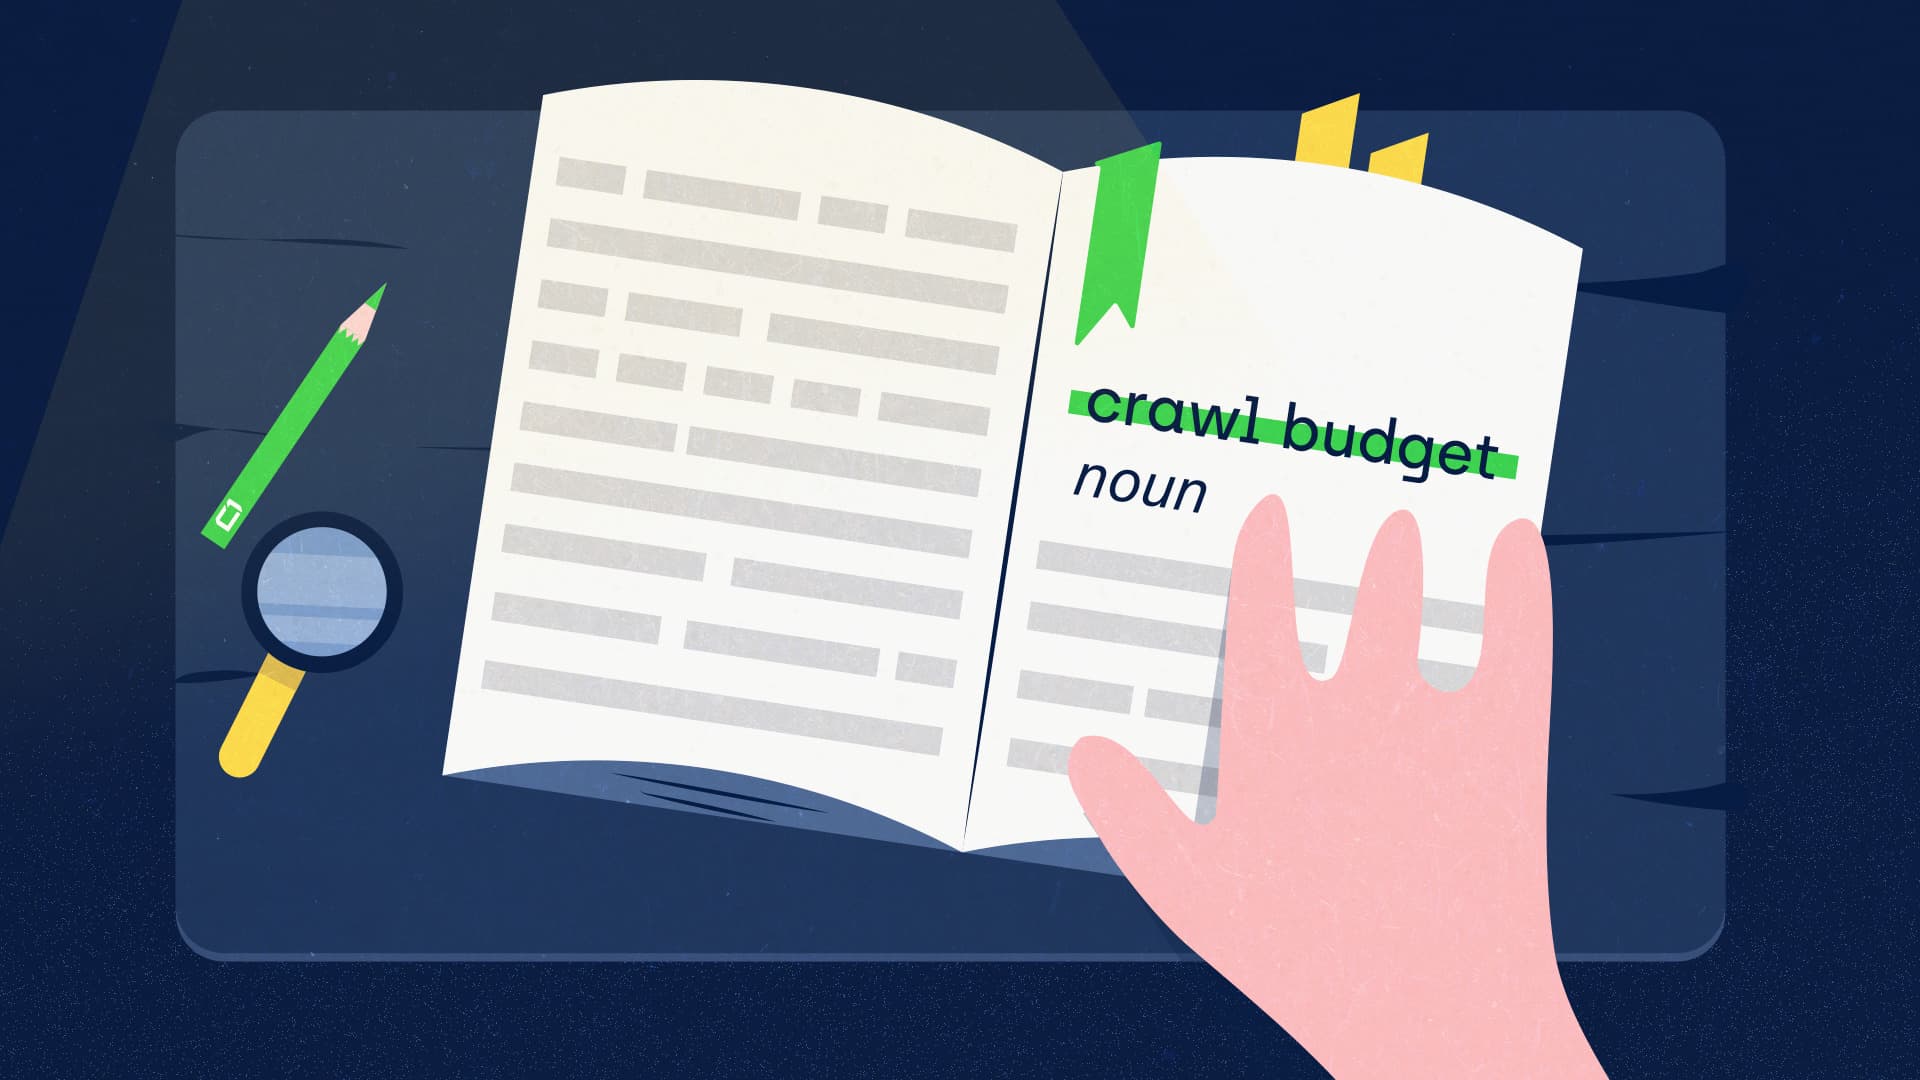 We-Need-to-Redefine-the-Crawl-Budget - 000-Redefining-Crawl-Budget